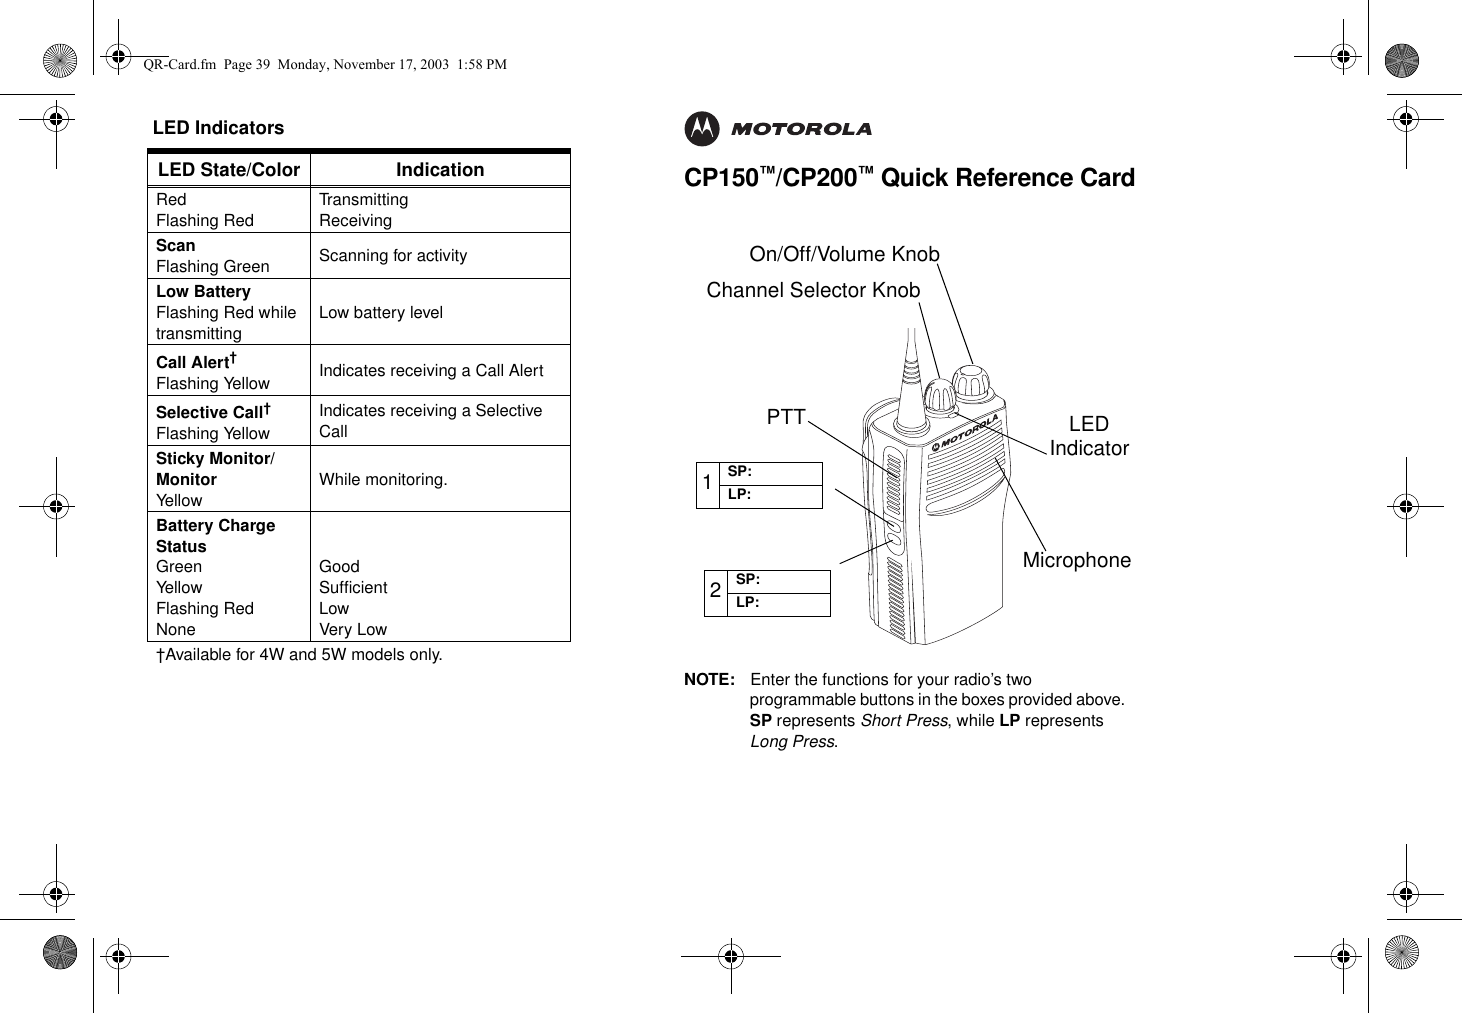 CP150™/CP200™ Quick Reference CardNOTE: Enter the functions for your radio’s two programmable buttons in the boxes provided above. SP represents Short Press, while LP represents Long Press.LED IndicatorsLED State/Color IndicationRedFlashing RedTransmittingReceivingScanFlashing Green Scanning for activityLow BatteryFlashing Red while transmittingLow battery levelCall Alert†Flashing Yellow Indicates receiving a Call AlertSelective Call†Flashing YellowIndicates receiving a Selective CallSticky Monitor/MonitorYellowWhile monitoring.Battery Charge StatusGreenYellowFlashing RedNoneGoodSufficientLowVery Low†Available for 4W and 5W models only.MicrophonePTT2SP:LP:1SP:LP:LEDIndicatorChannel Selector KnobOn/Off/Volume KnobQR-Card.fm  Page 39  Monday, November 17, 2003  1:58 PM